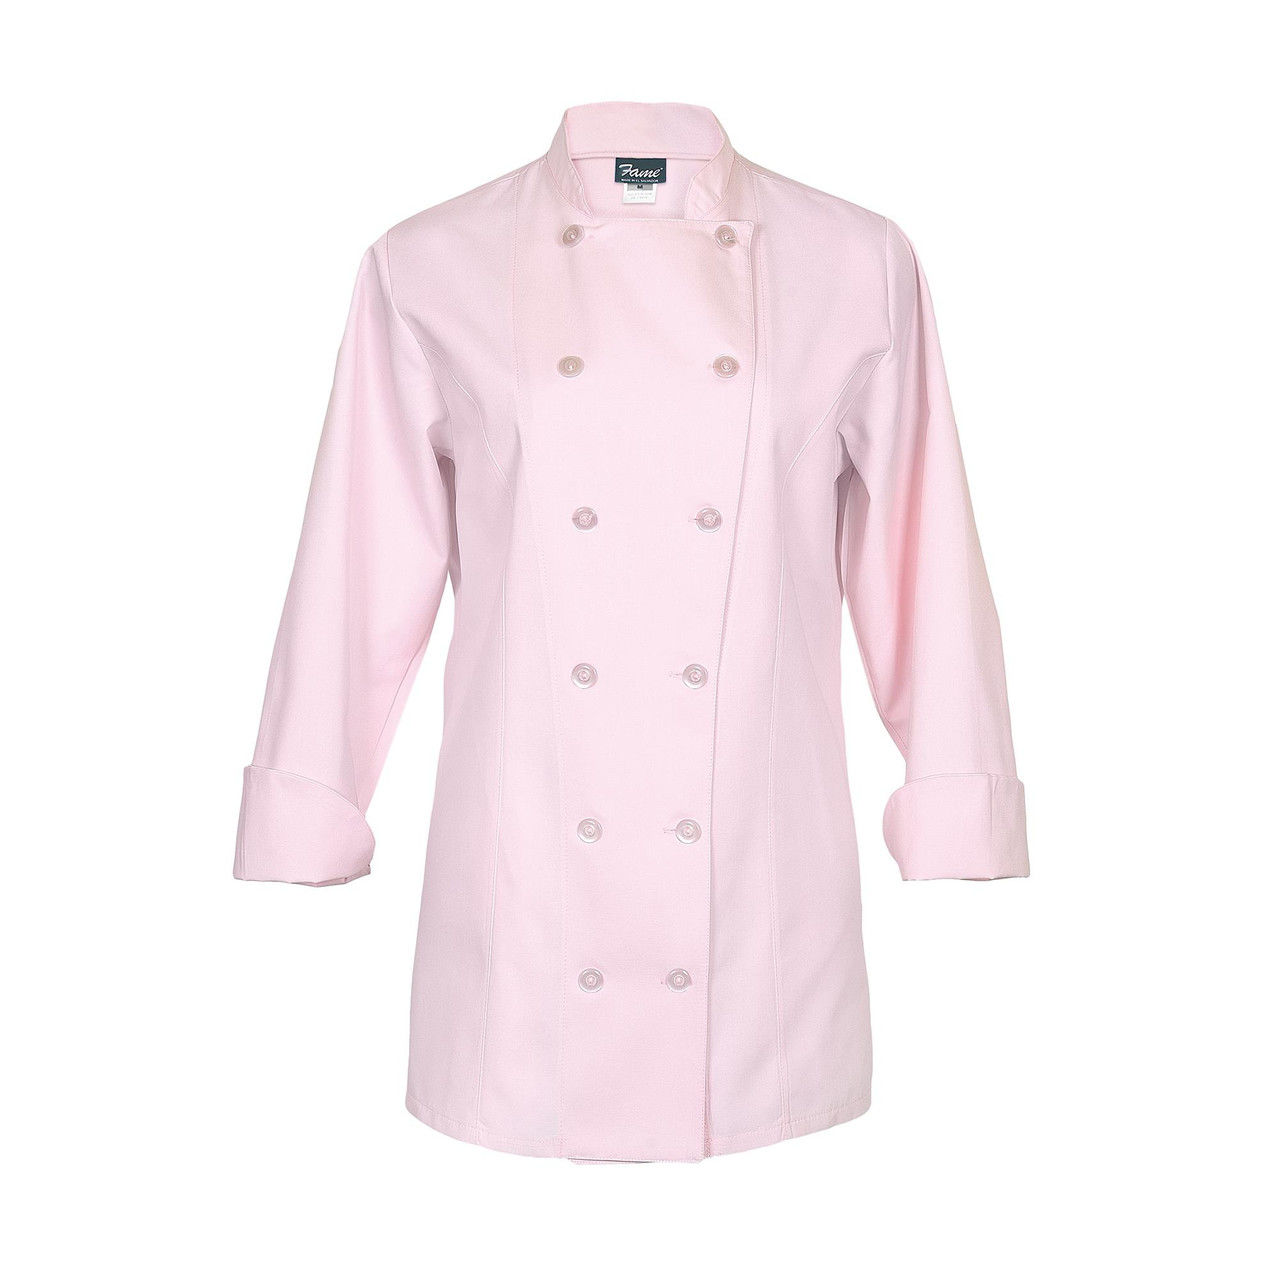 What sleeve length does this chef coat have?